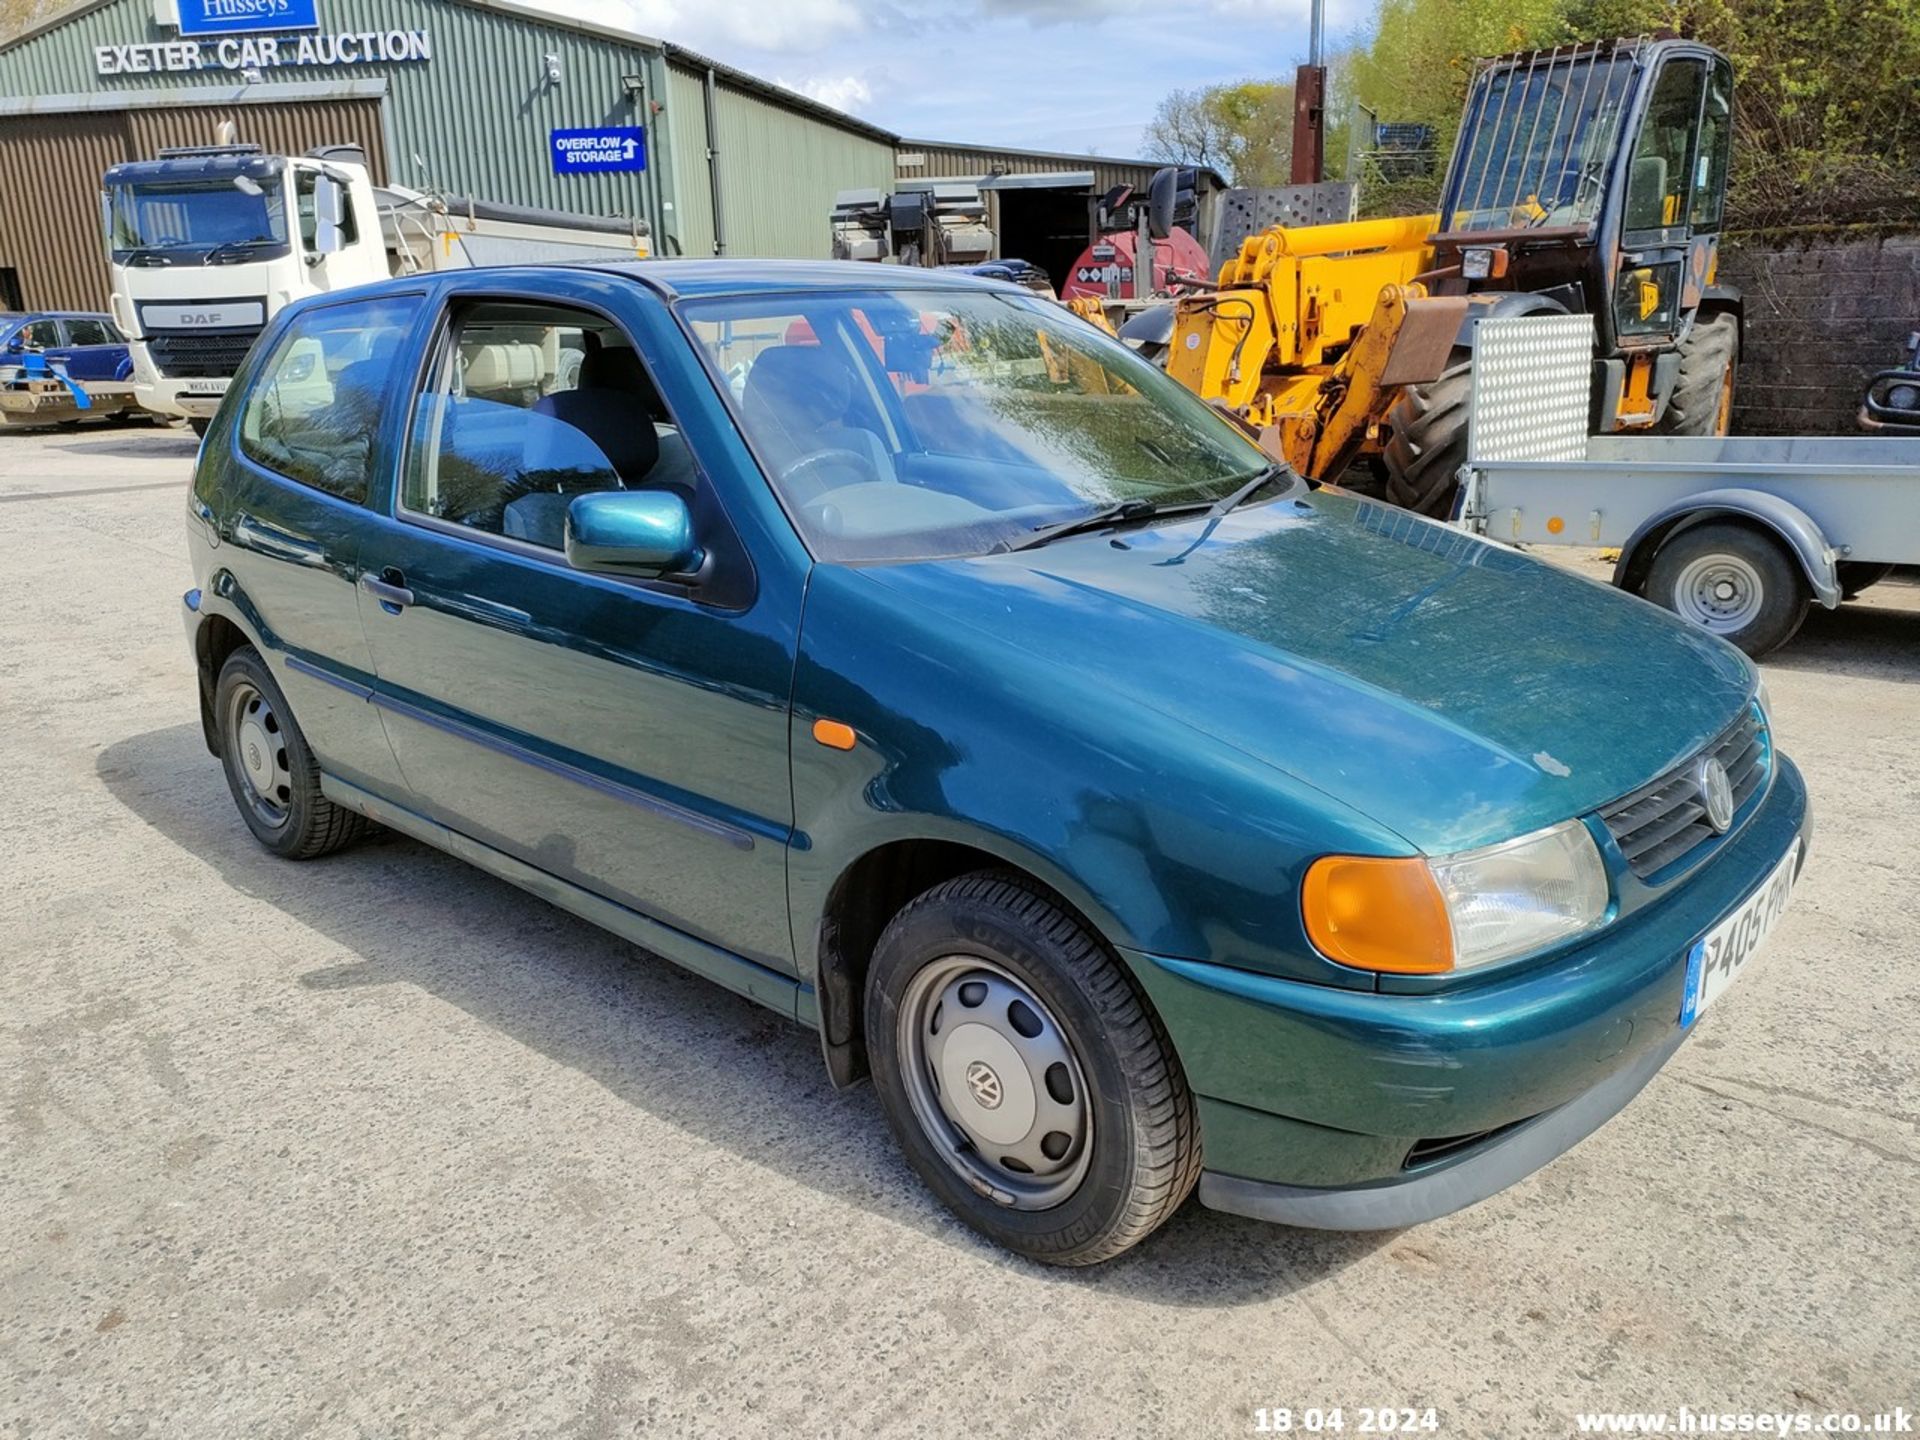 1997 VOLKSWAGEN POLO 1.4 CL AUTO - 1390cc 3dr Hatchback (Green, 68k) - Image 43 of 60